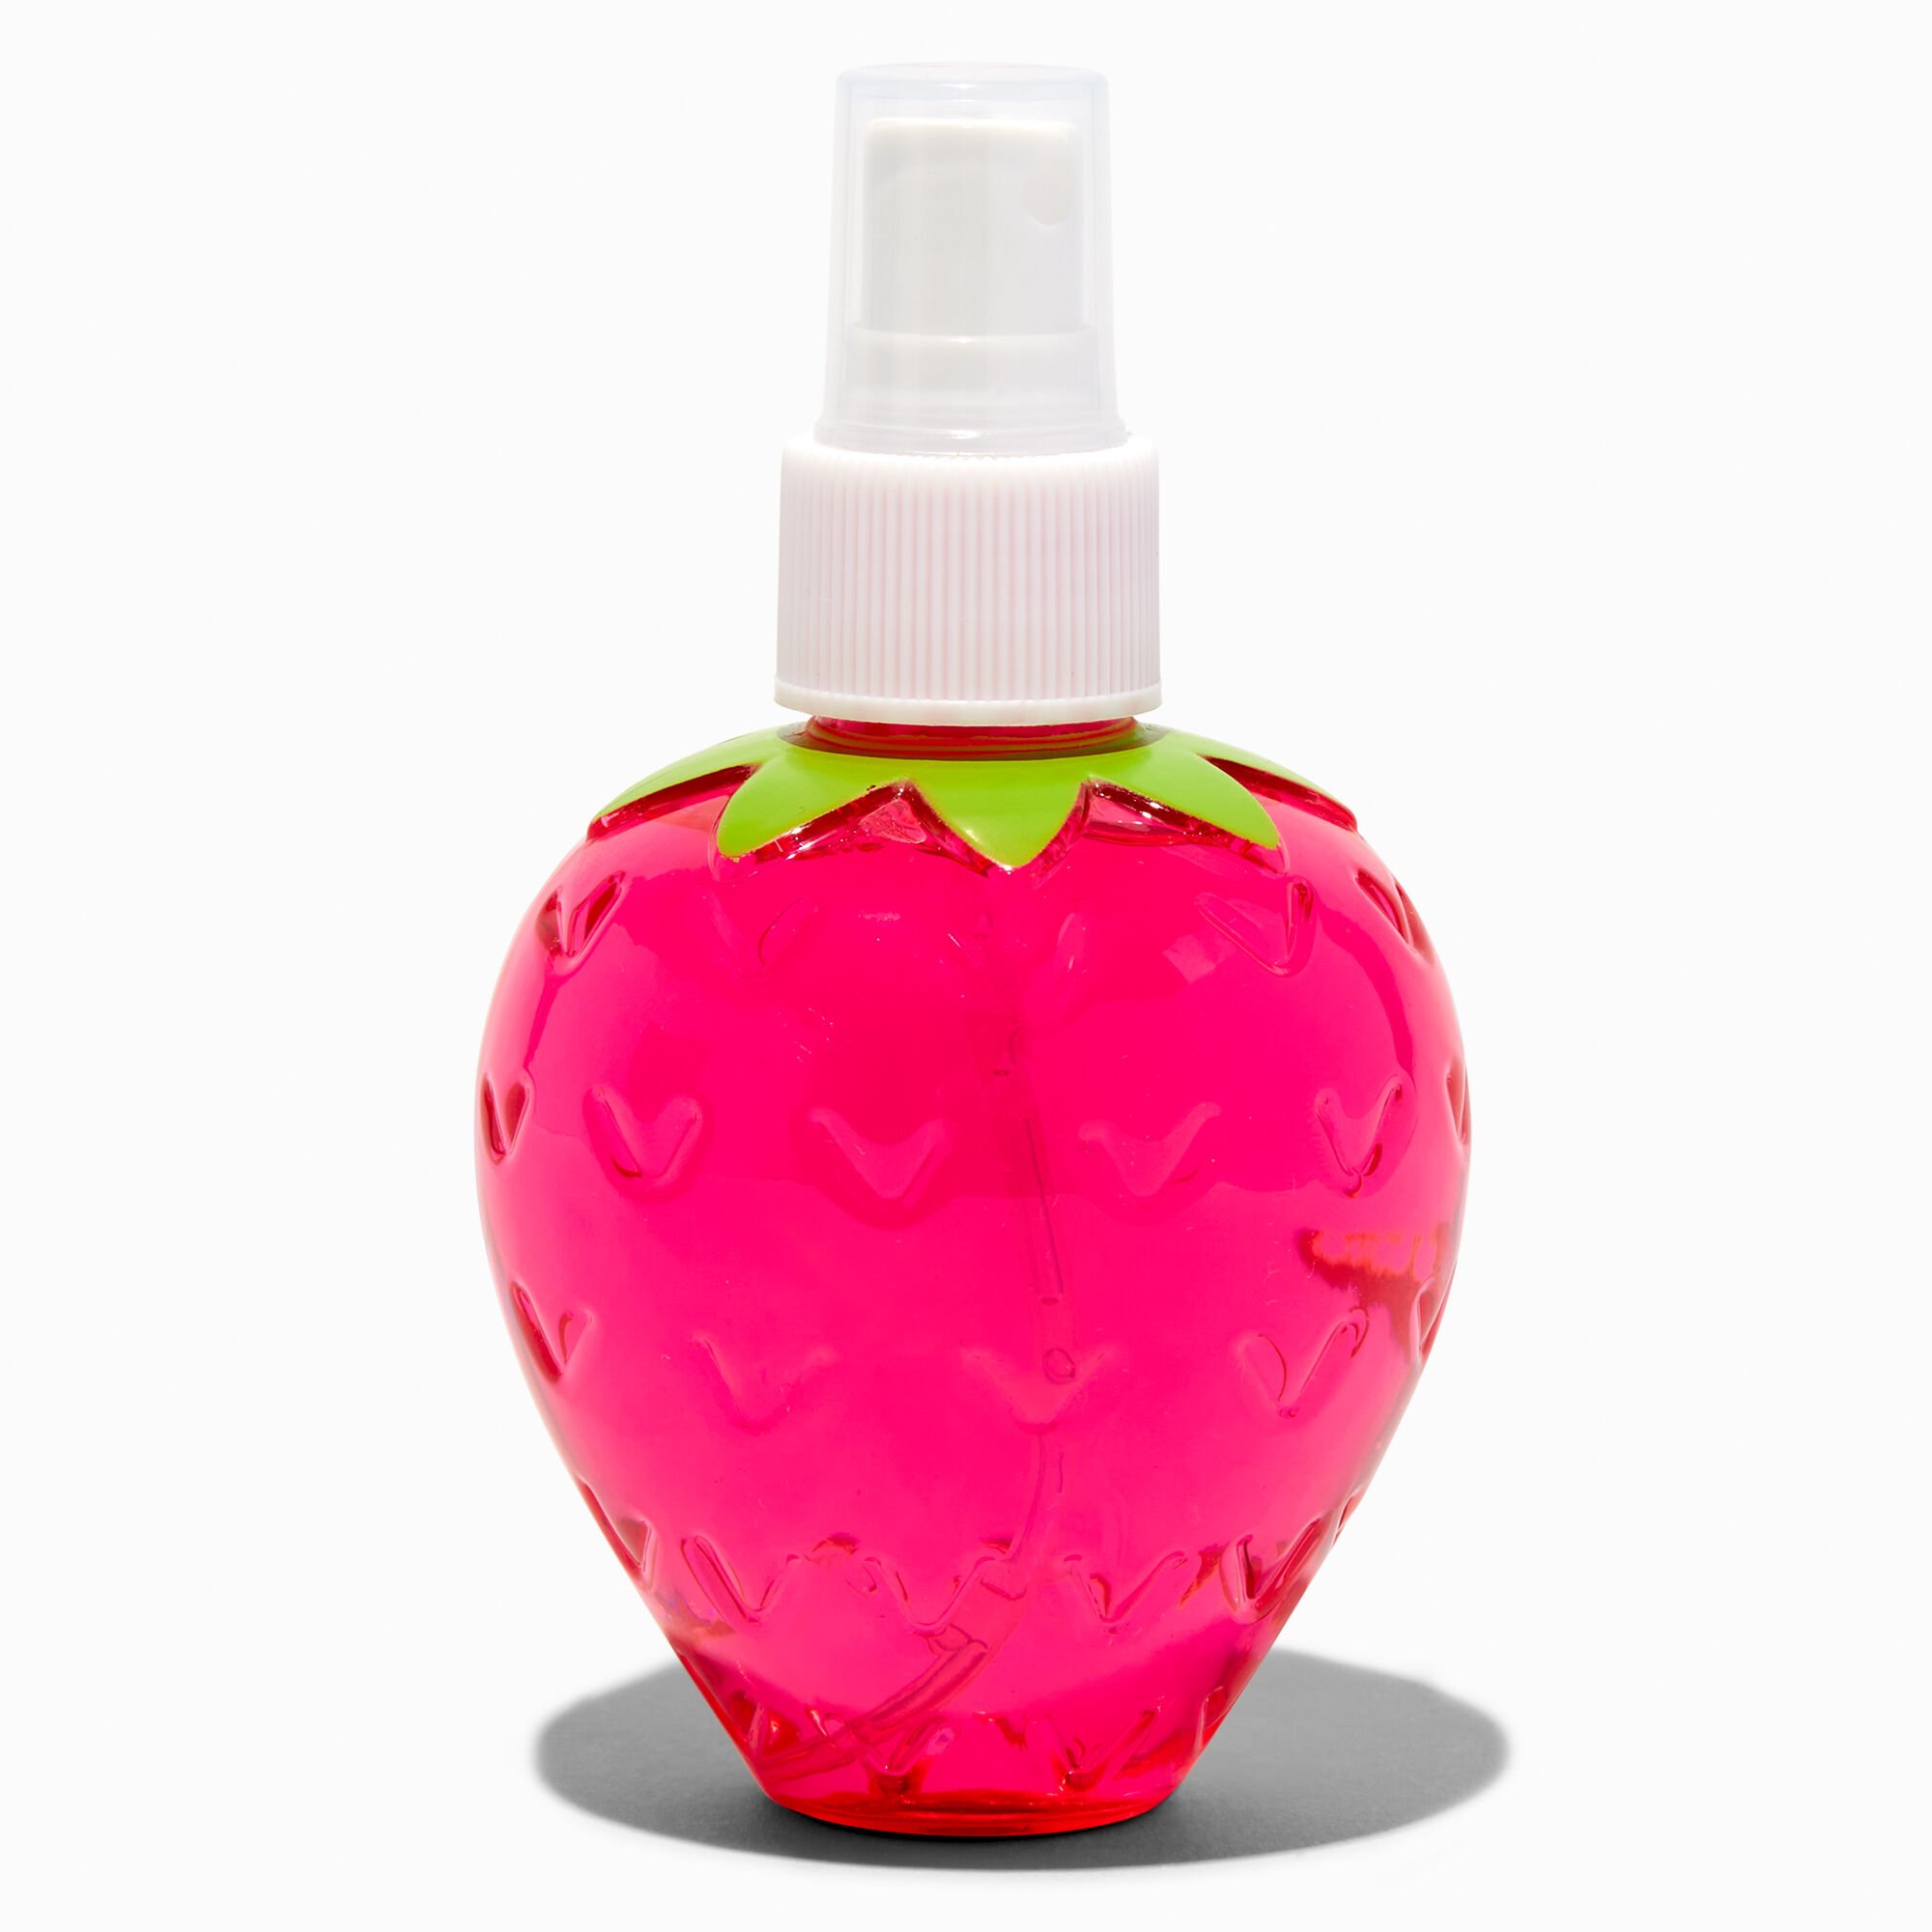 View Claires Strawberry Body Mist information